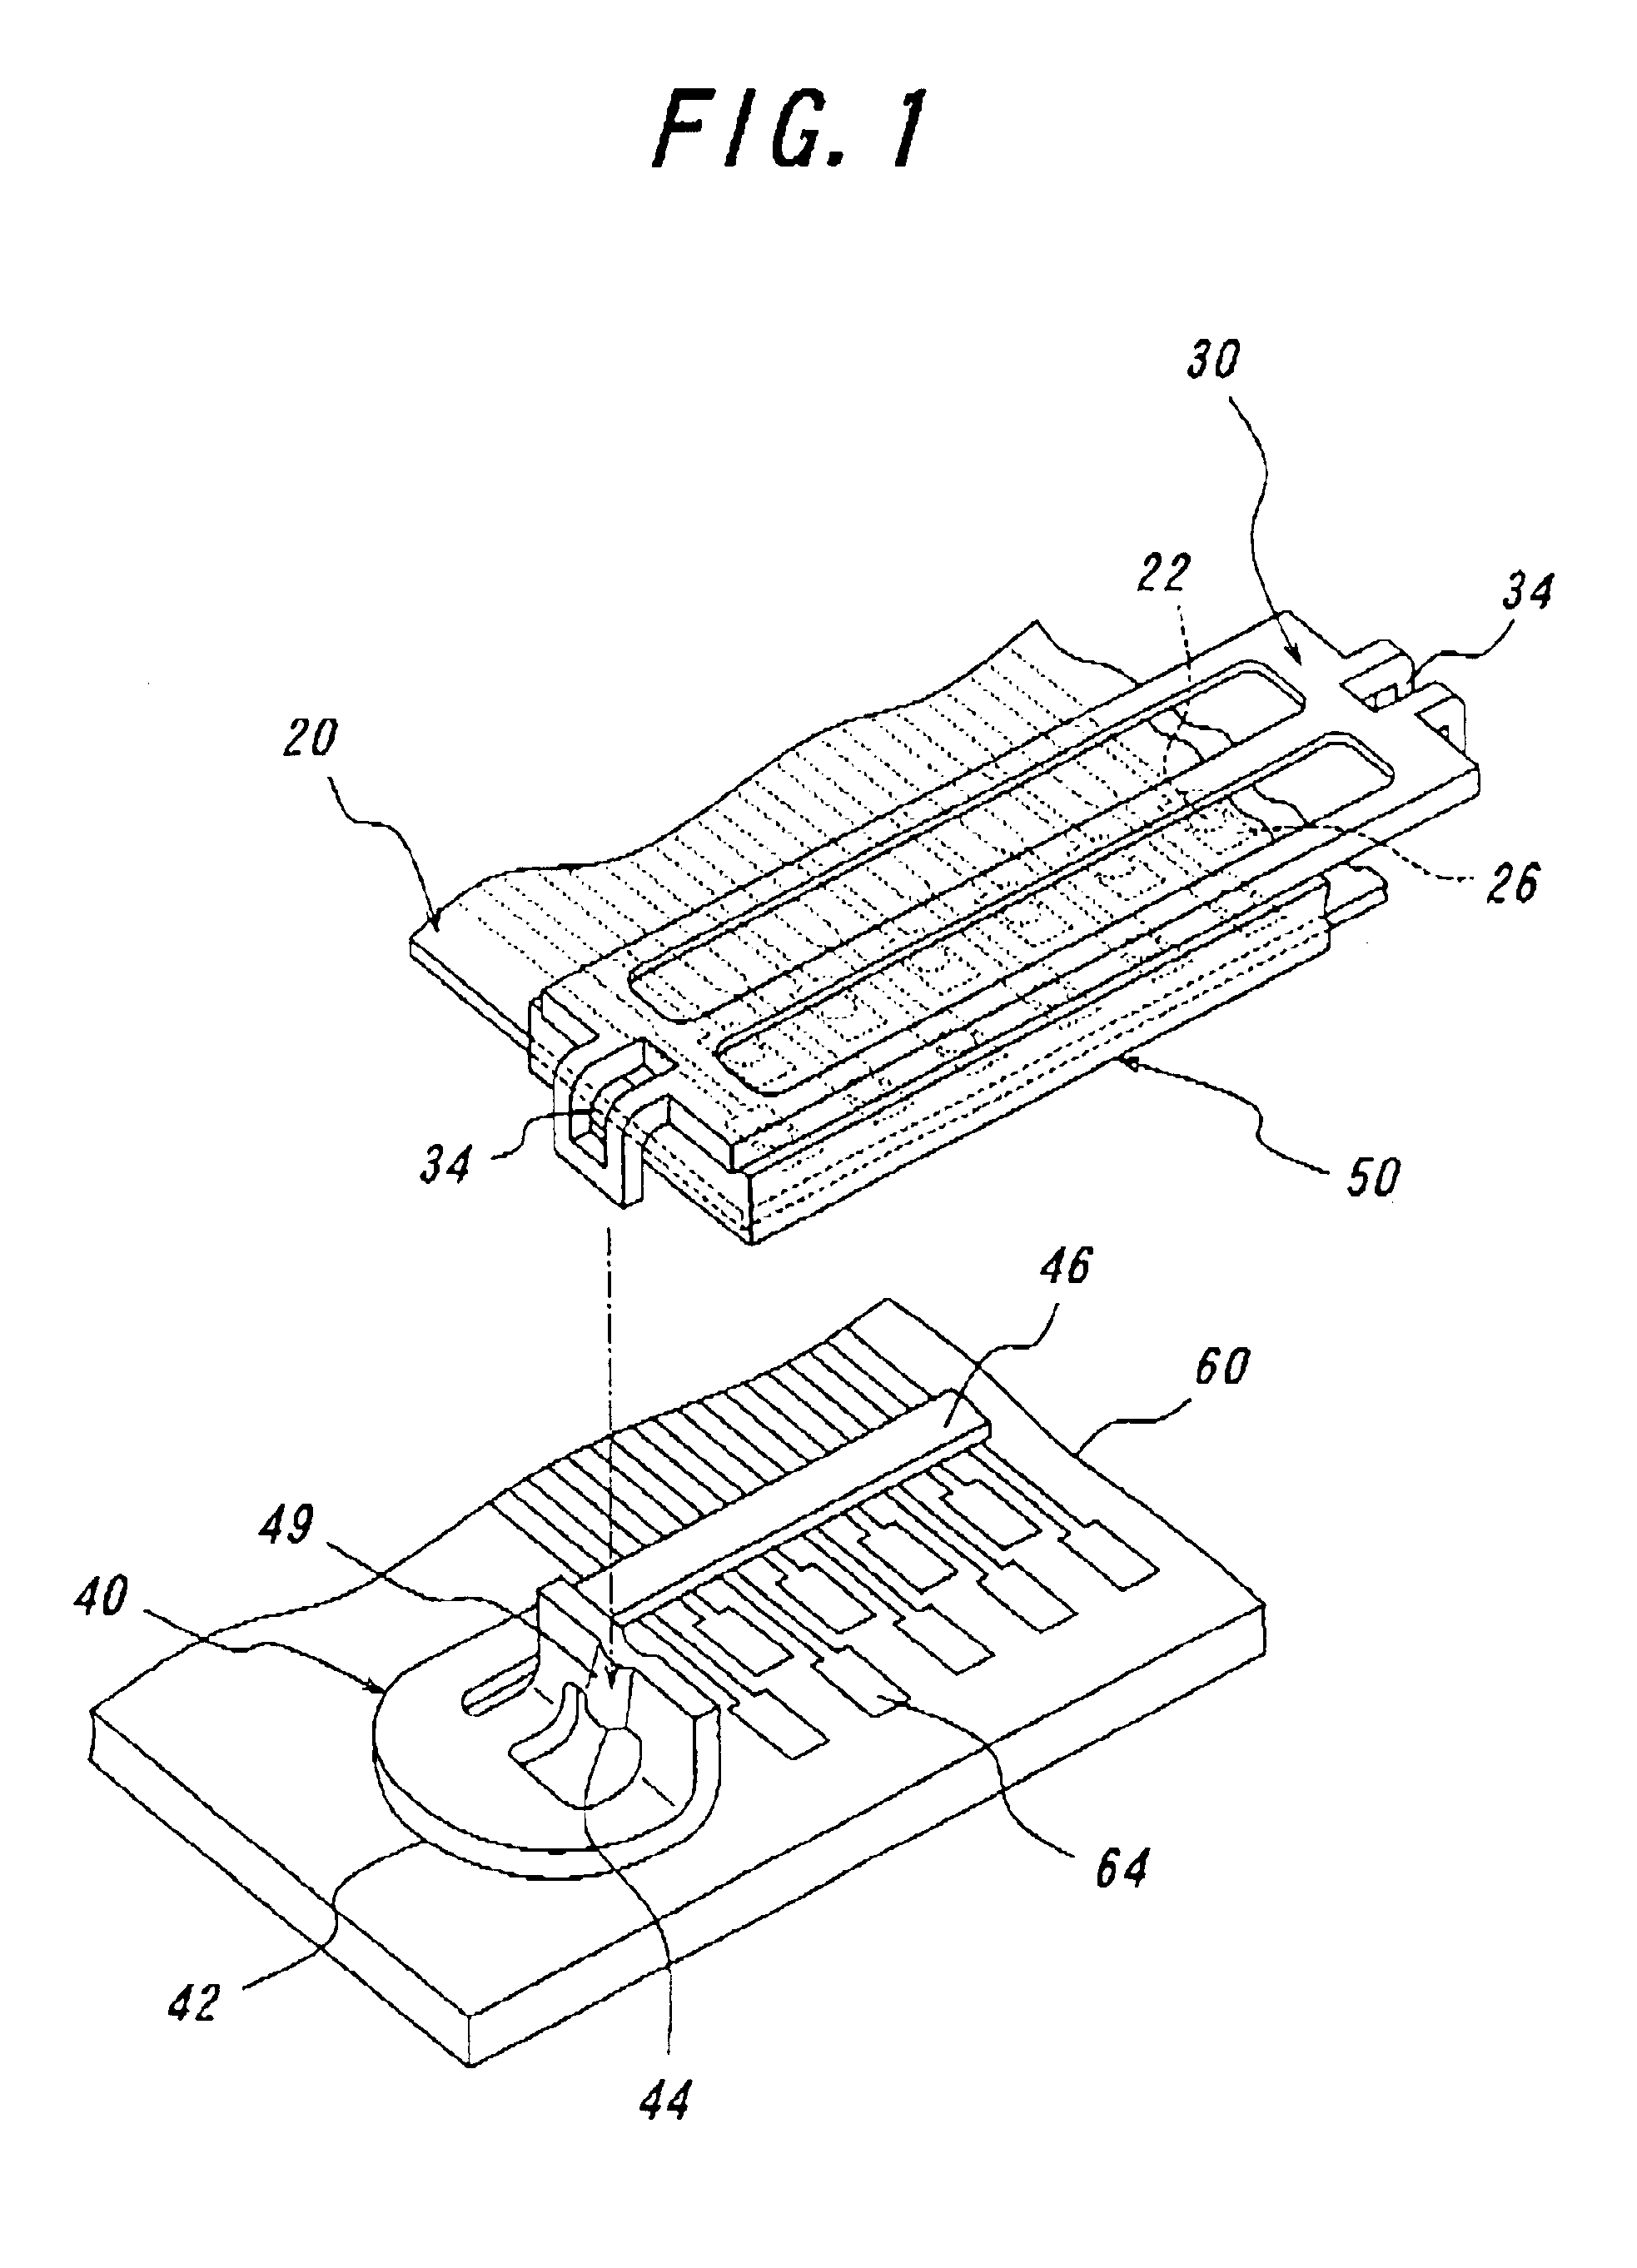 Flat and thin connector for electrically connecting a flexible printed circuit board and a hard board